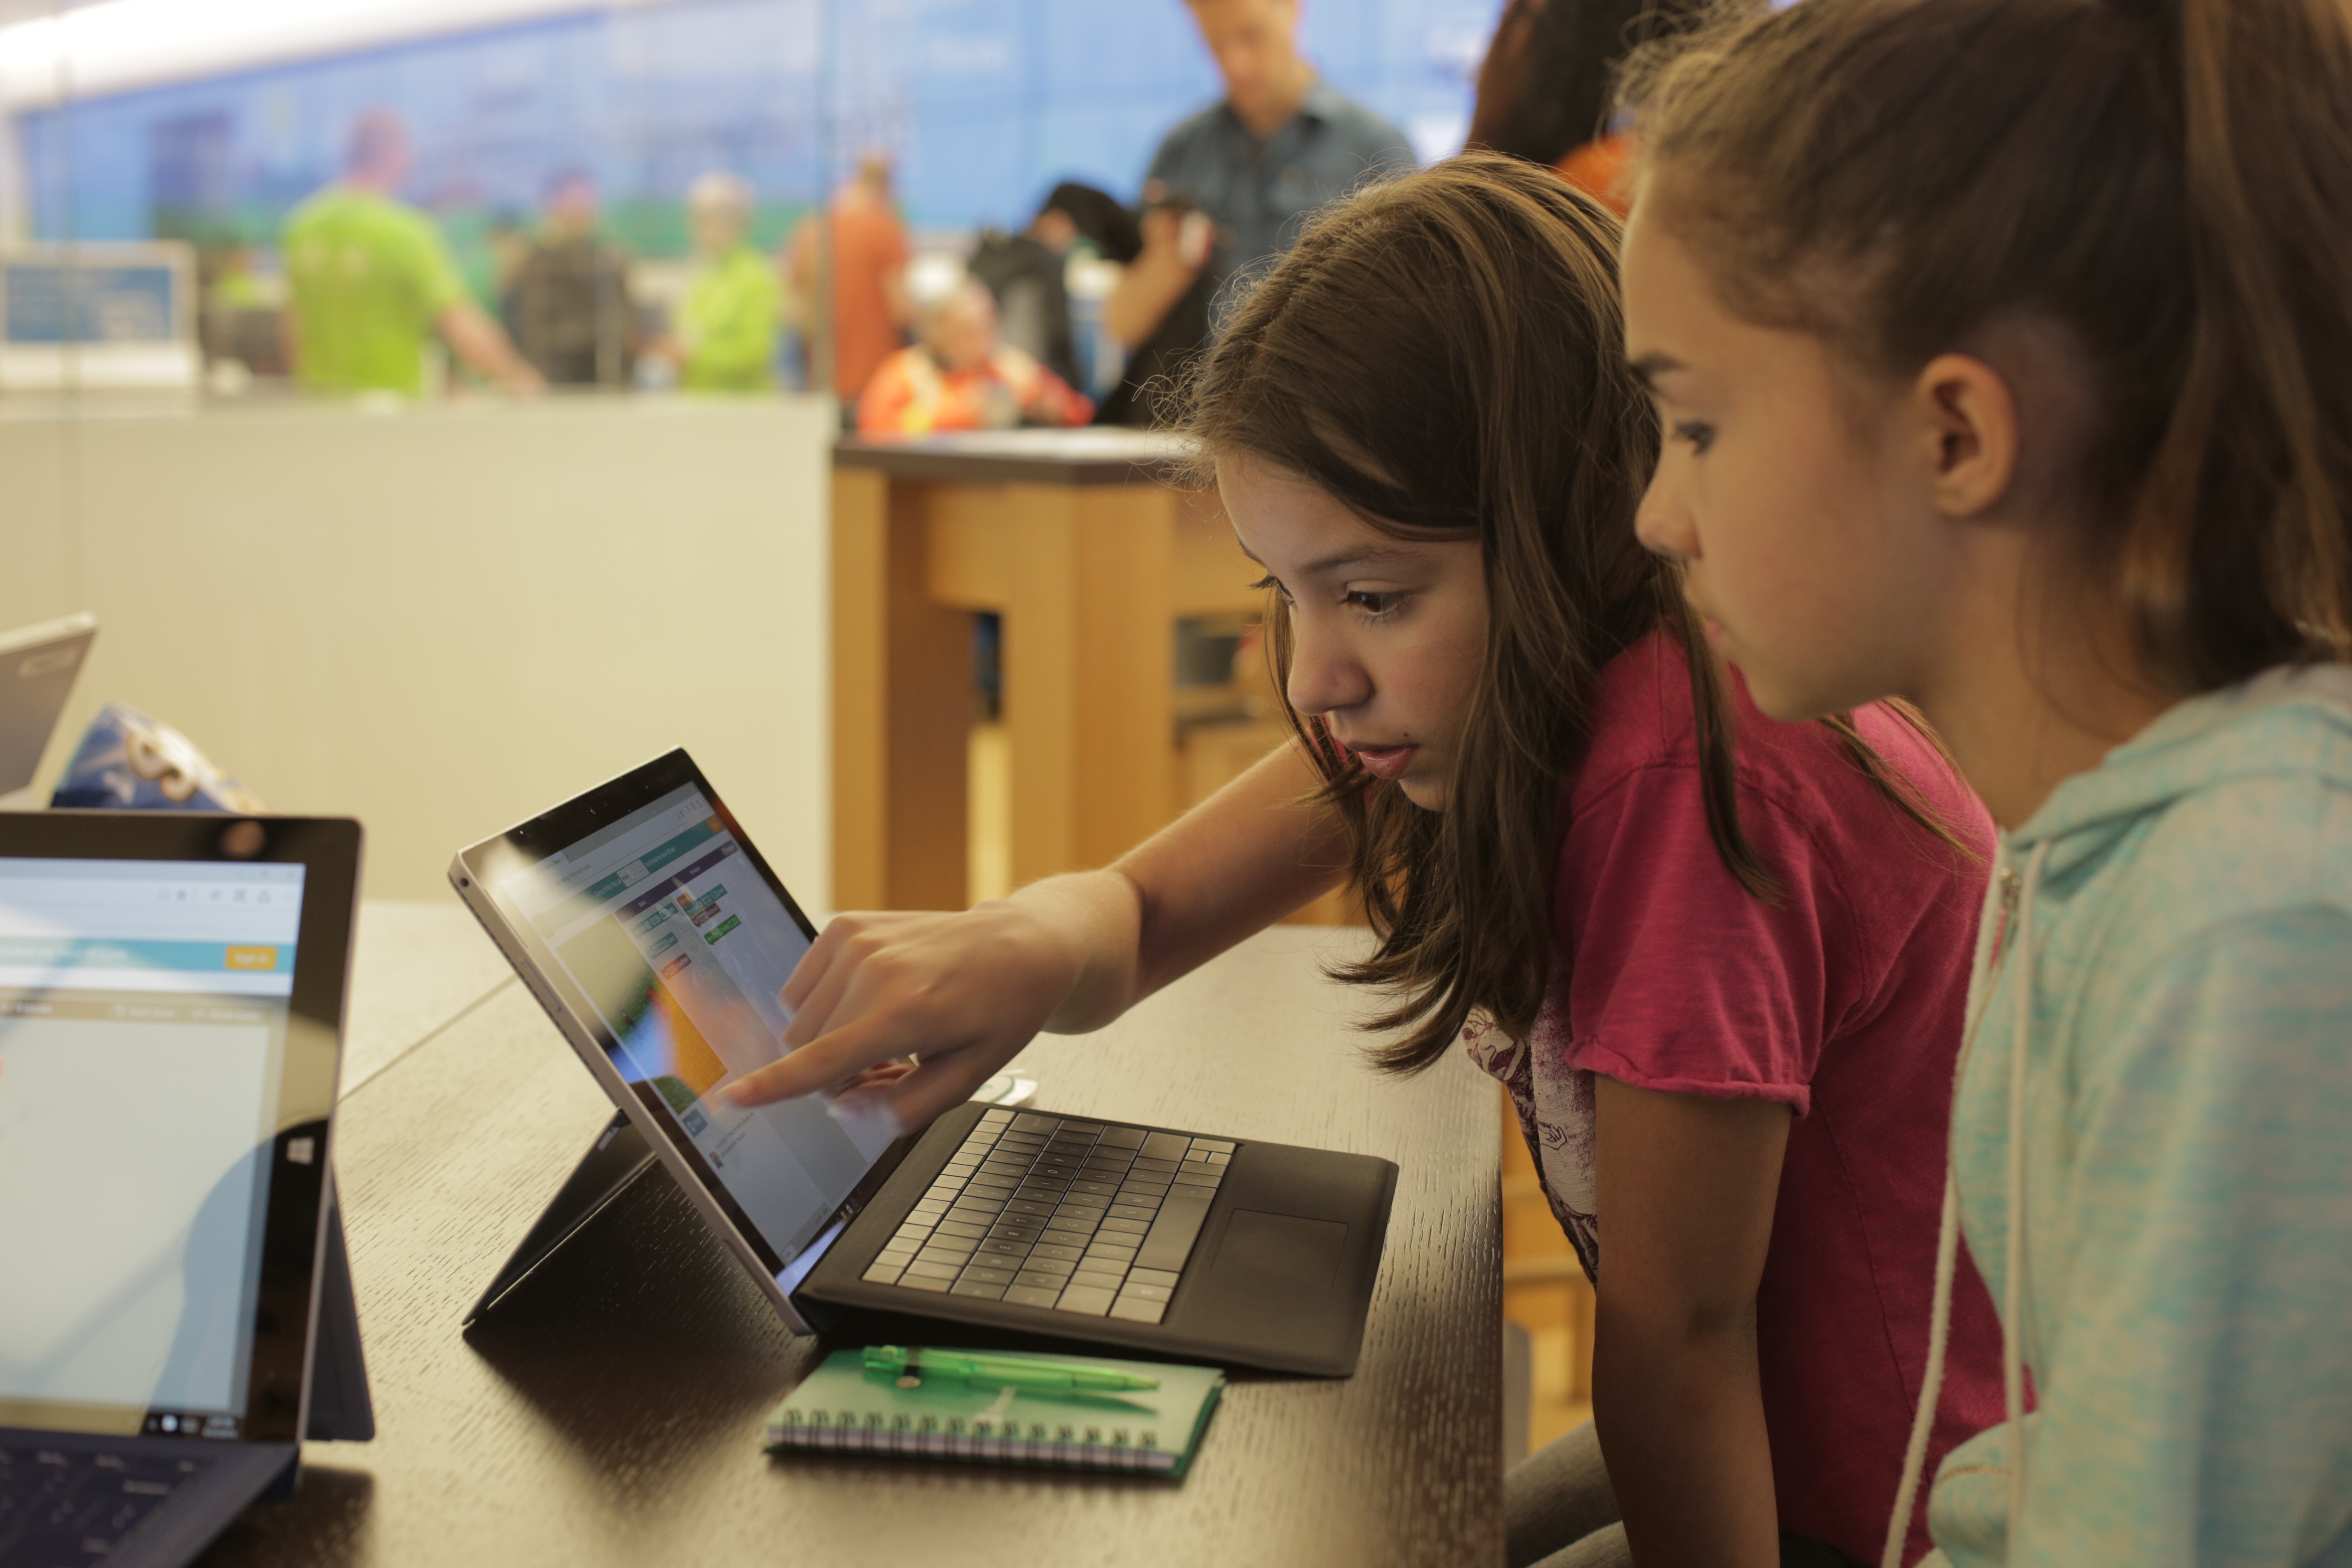 Two young students at Microsoft Store interacting with a Microsoft Surface.